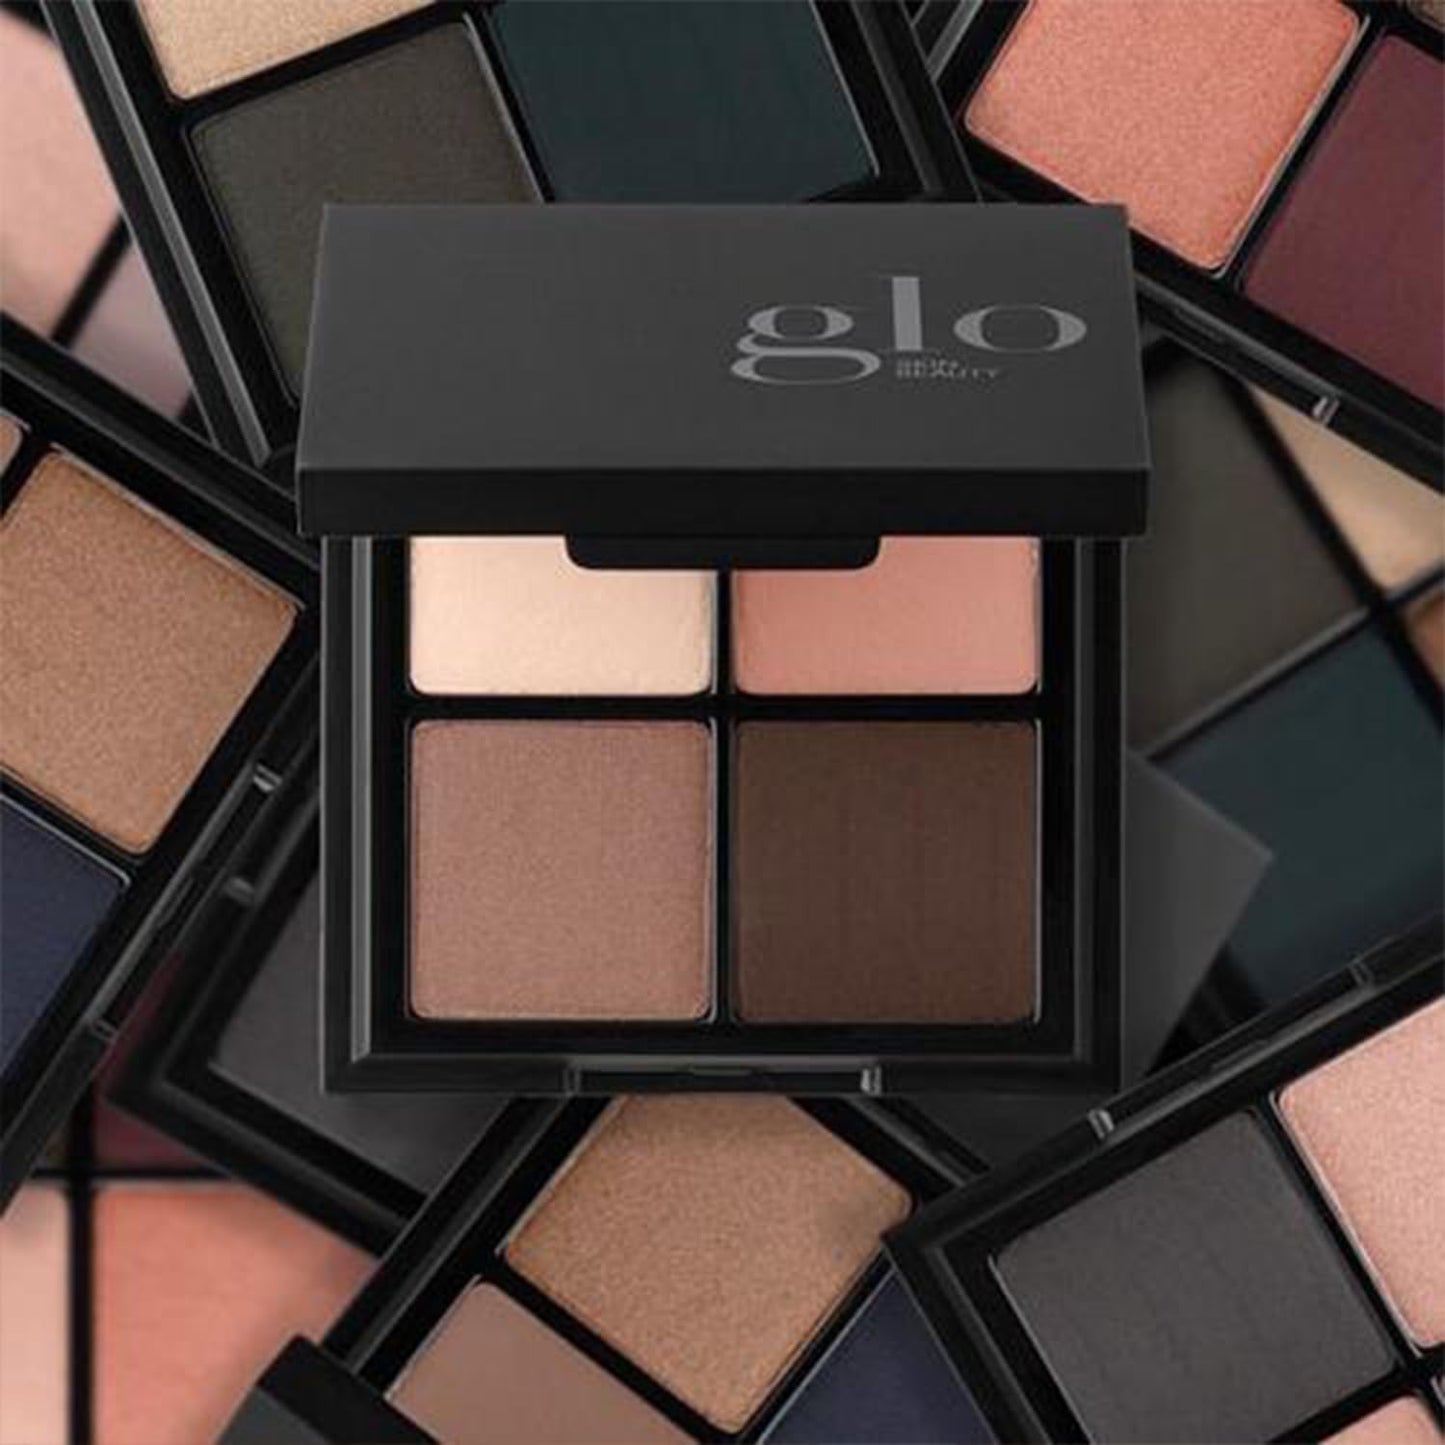 Glo Skin Beauty Eye Shadow Quad | Expertly Matched Shades for A Custom Eye Statement, (Cool Glow)